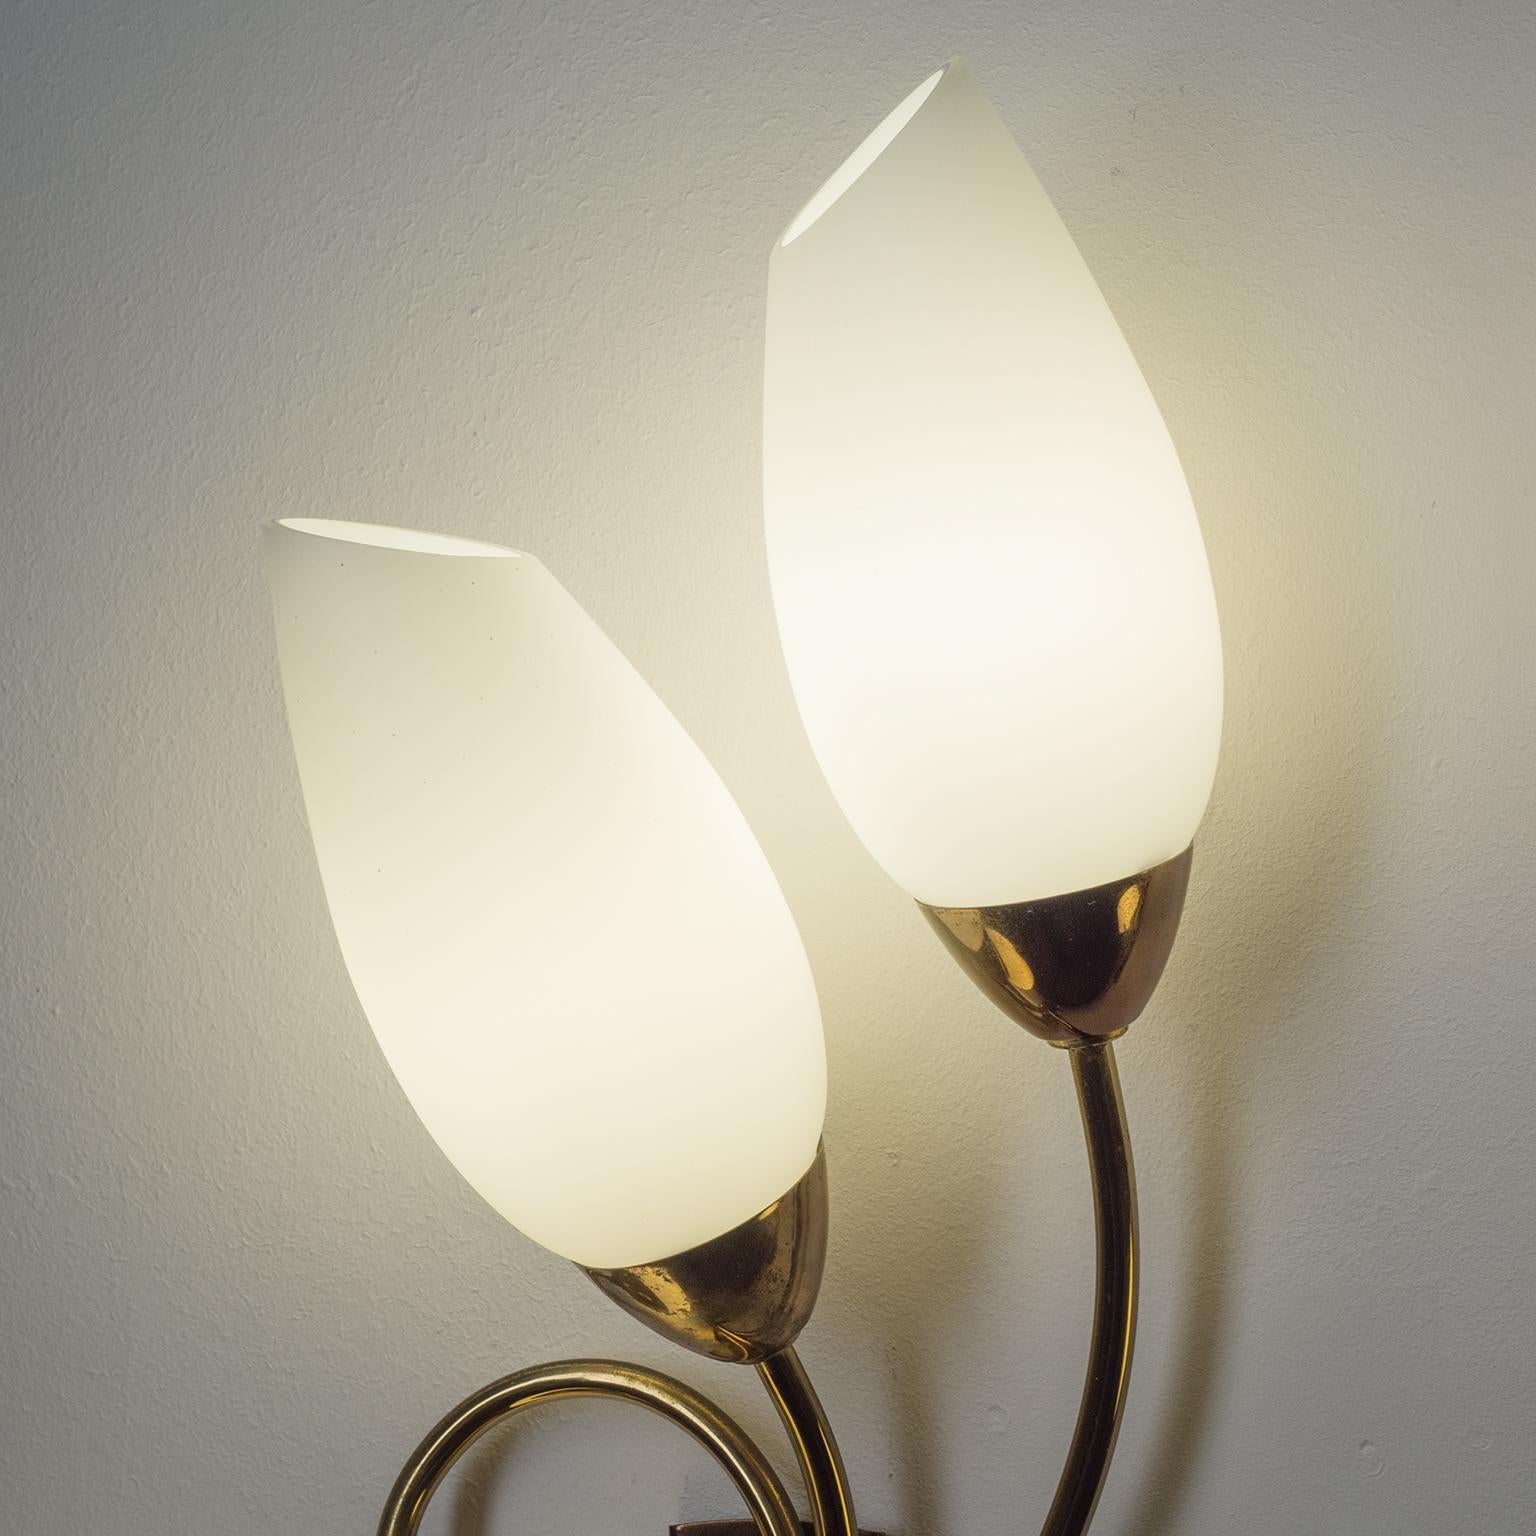 Large French Wall Lights, 1950s, Brass and Satin Glass 10